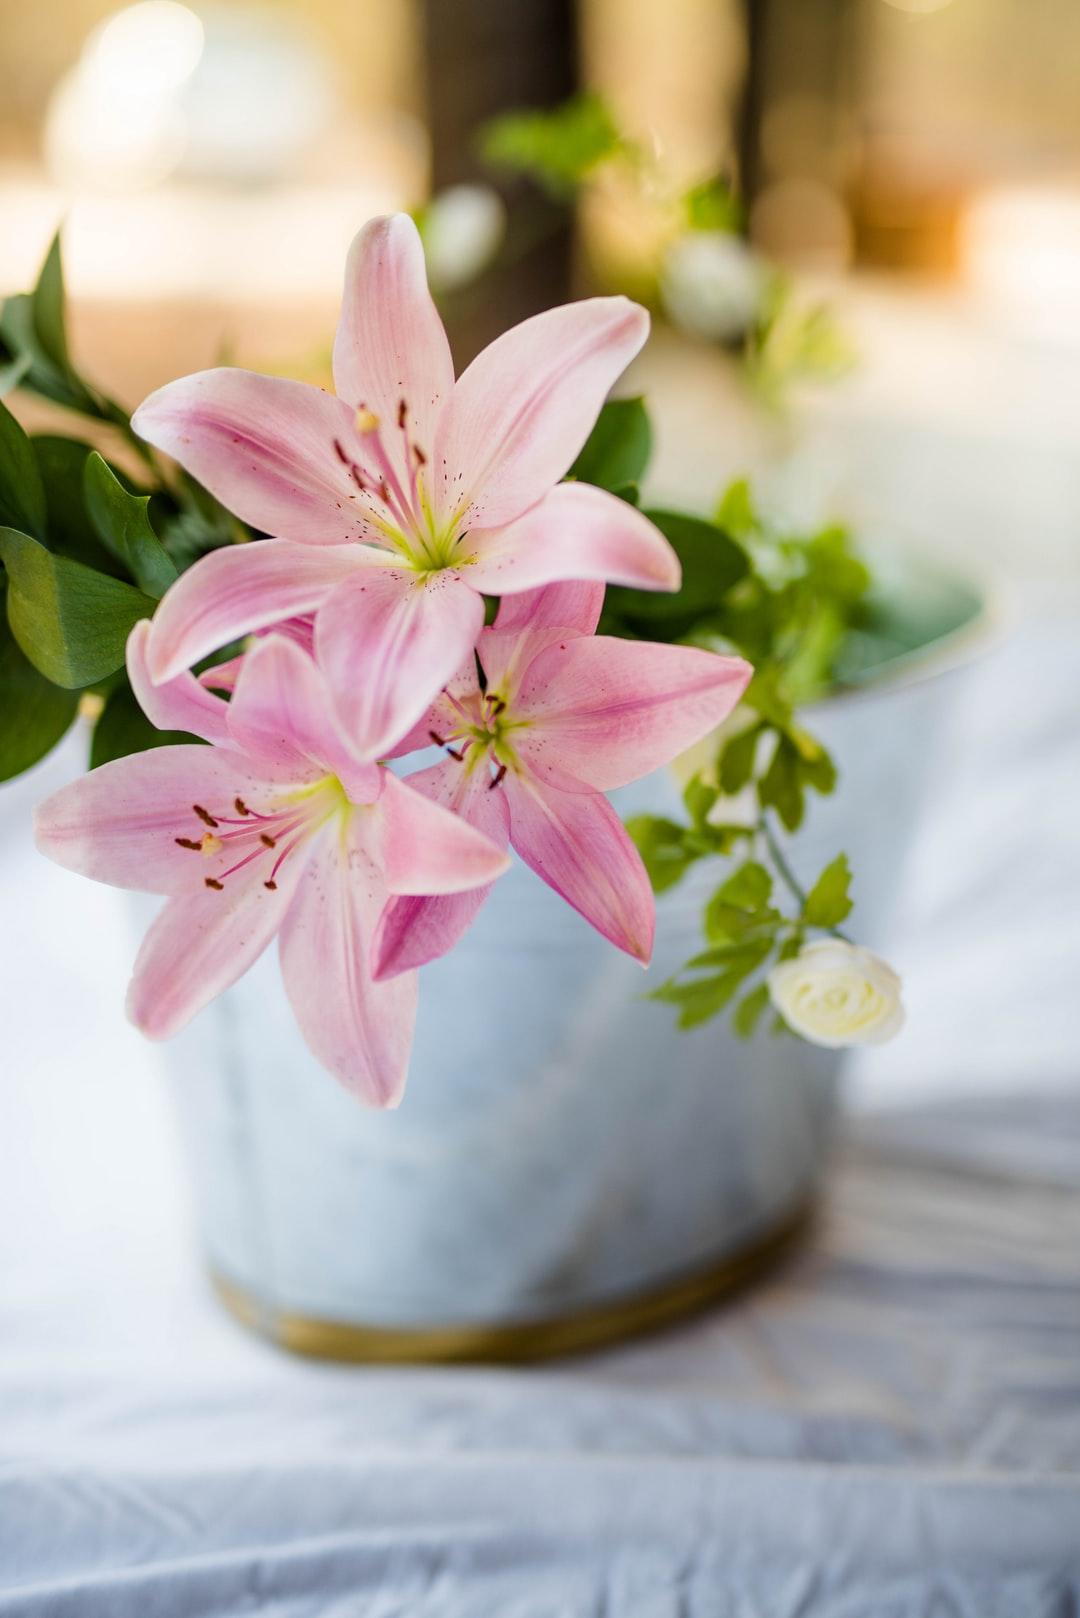 Lily Picture. Download Free Image